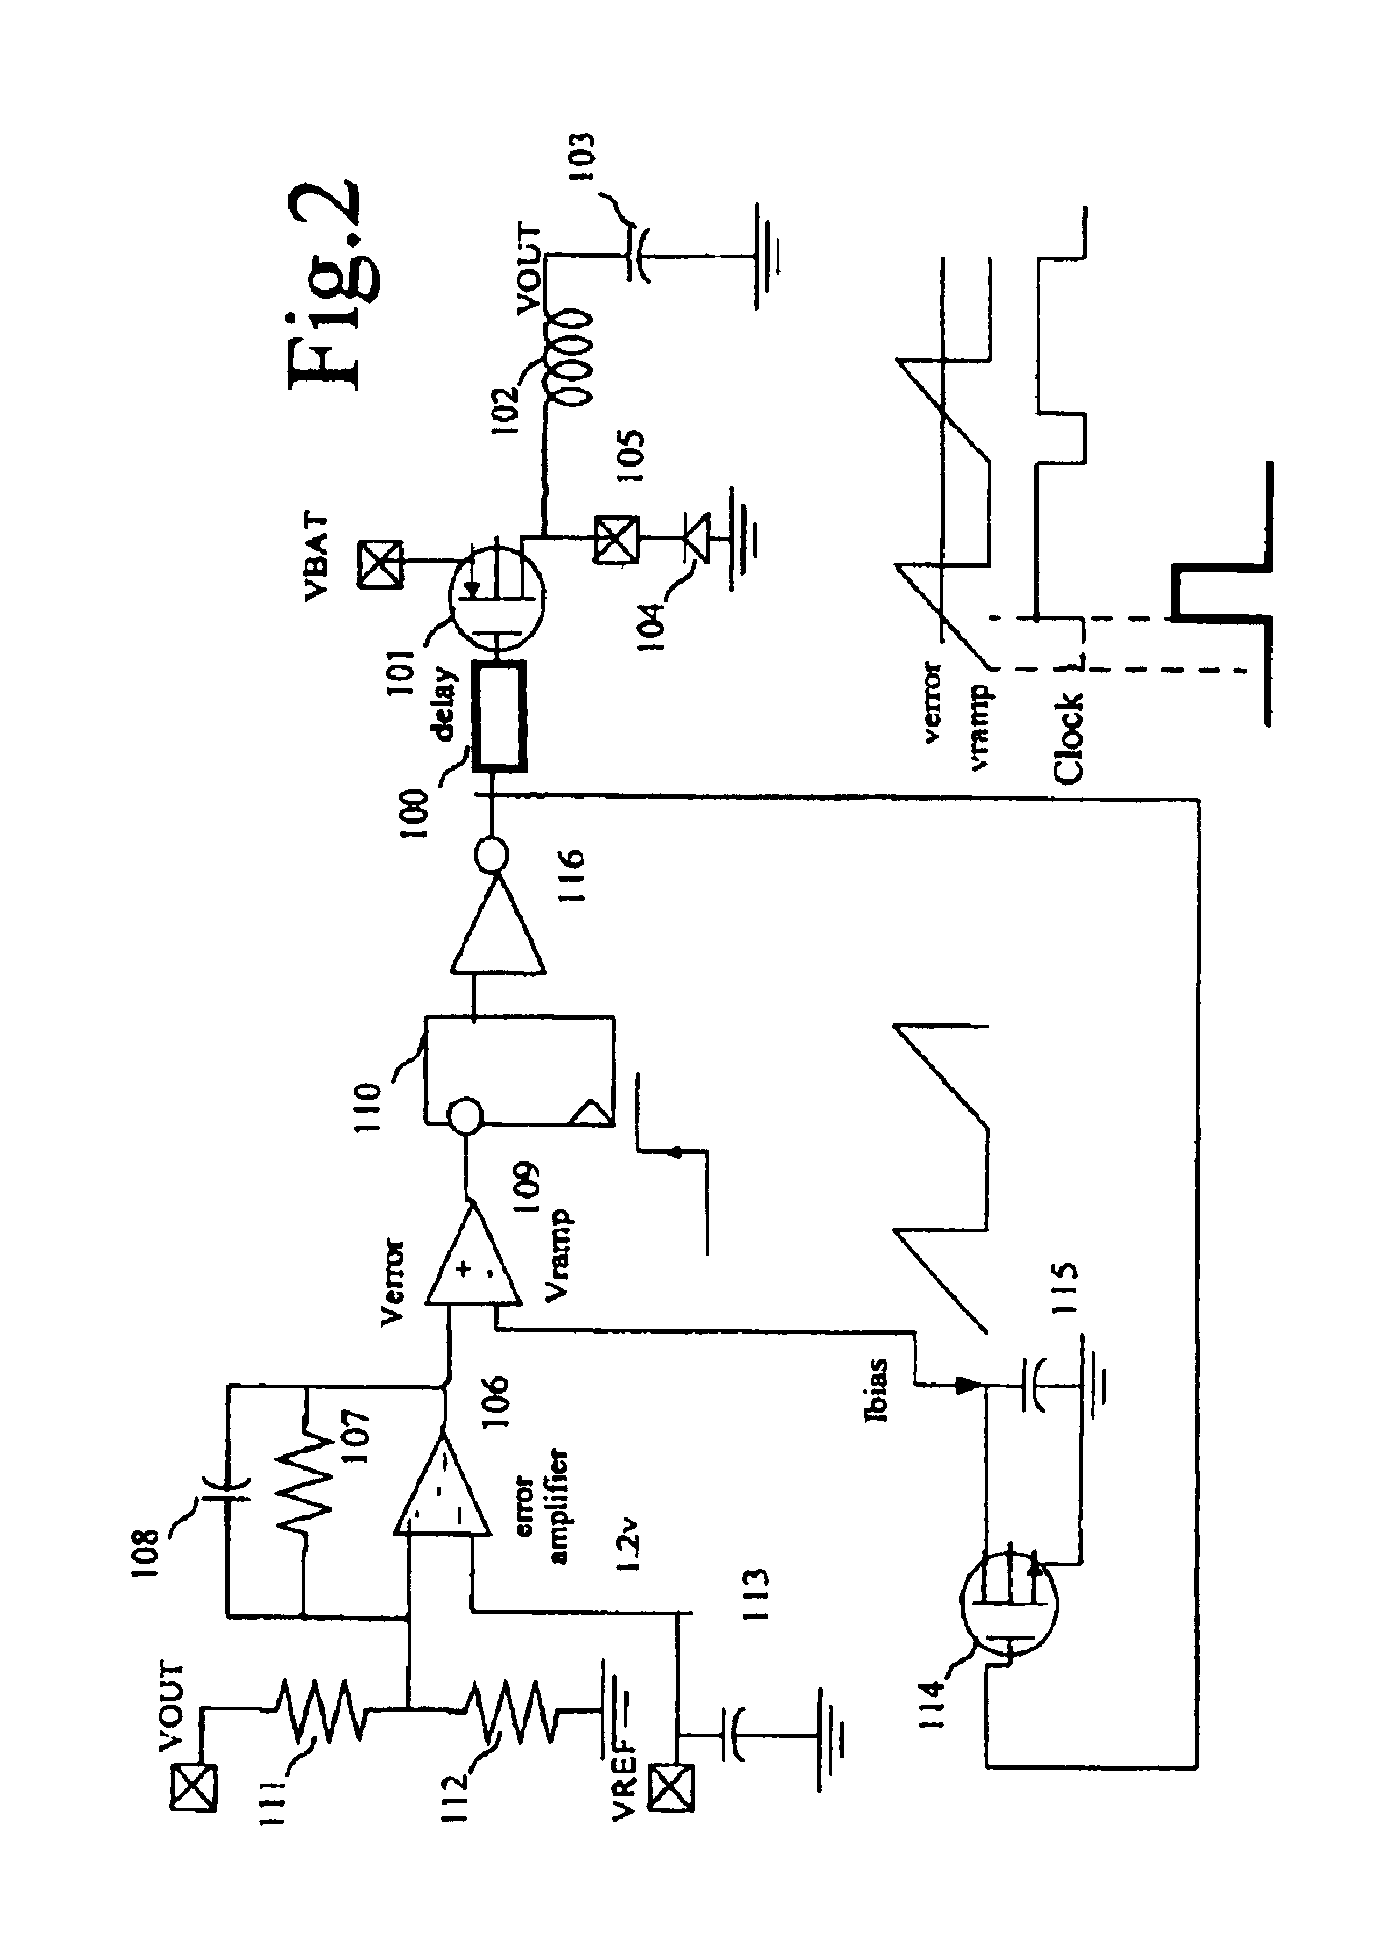 Switched mode power supply device adapted for low current drains, and cellular phone equipped with such a device